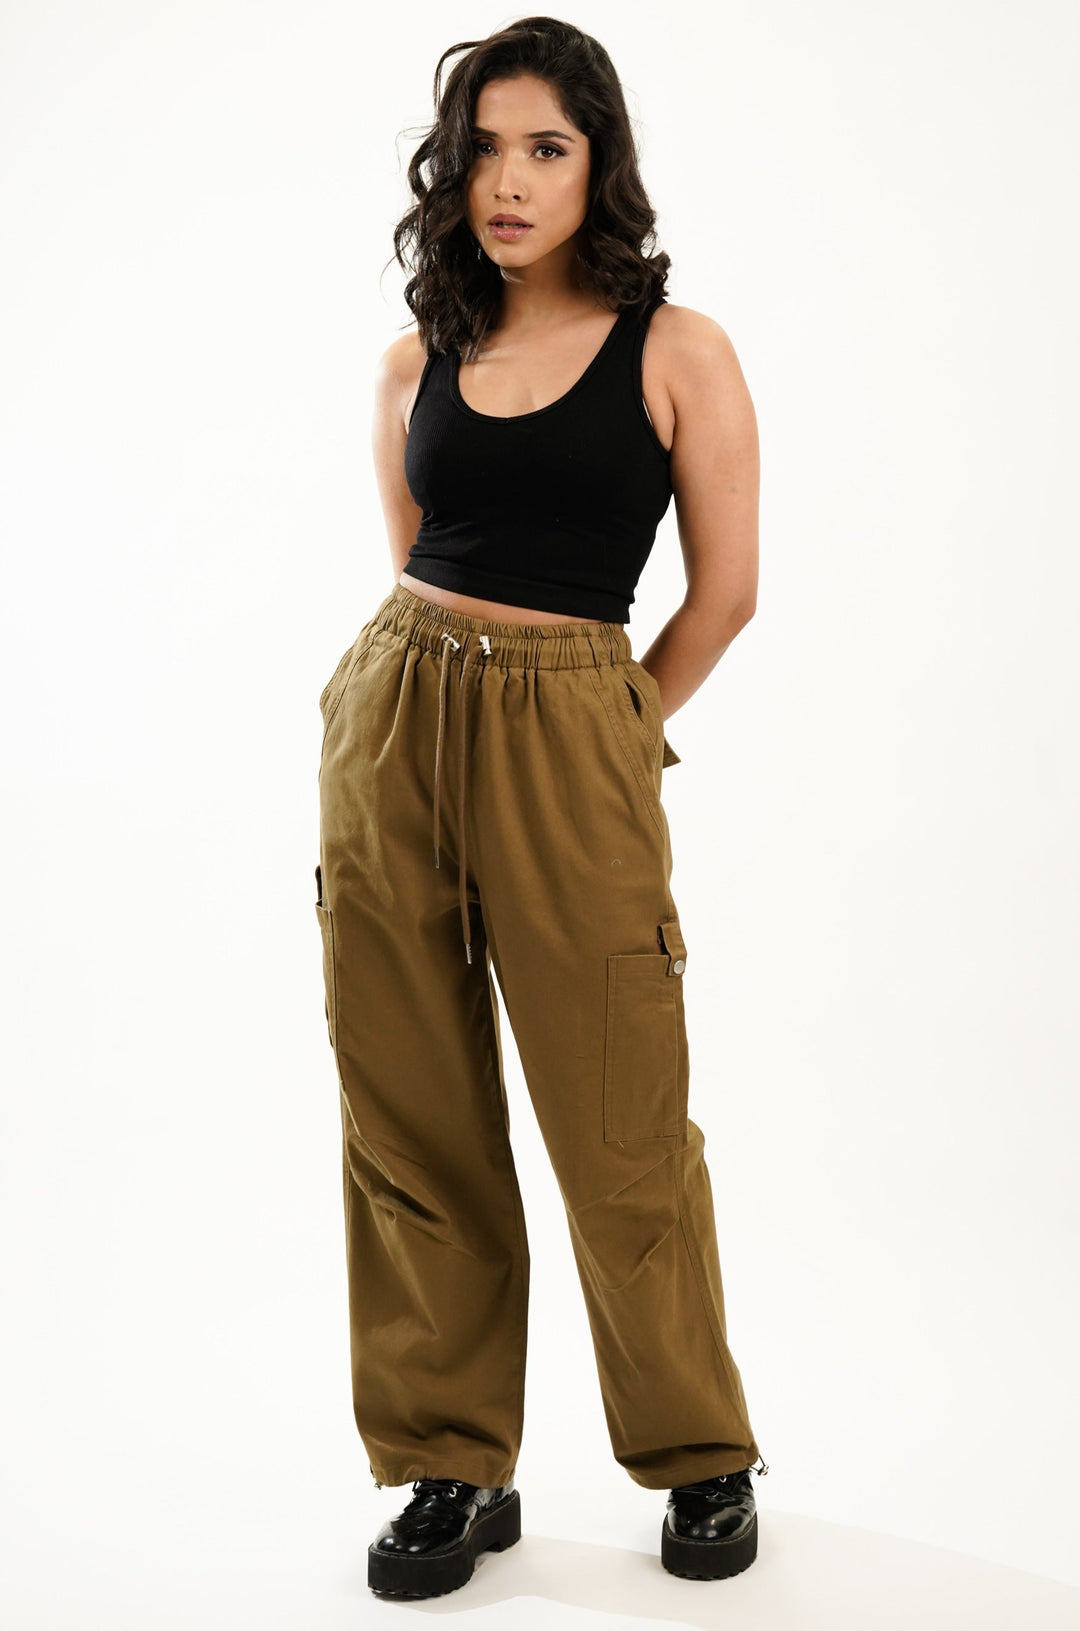 Relaxed Fit Plus Size Cargos Pants Women Baggy Loose Fit Comfy